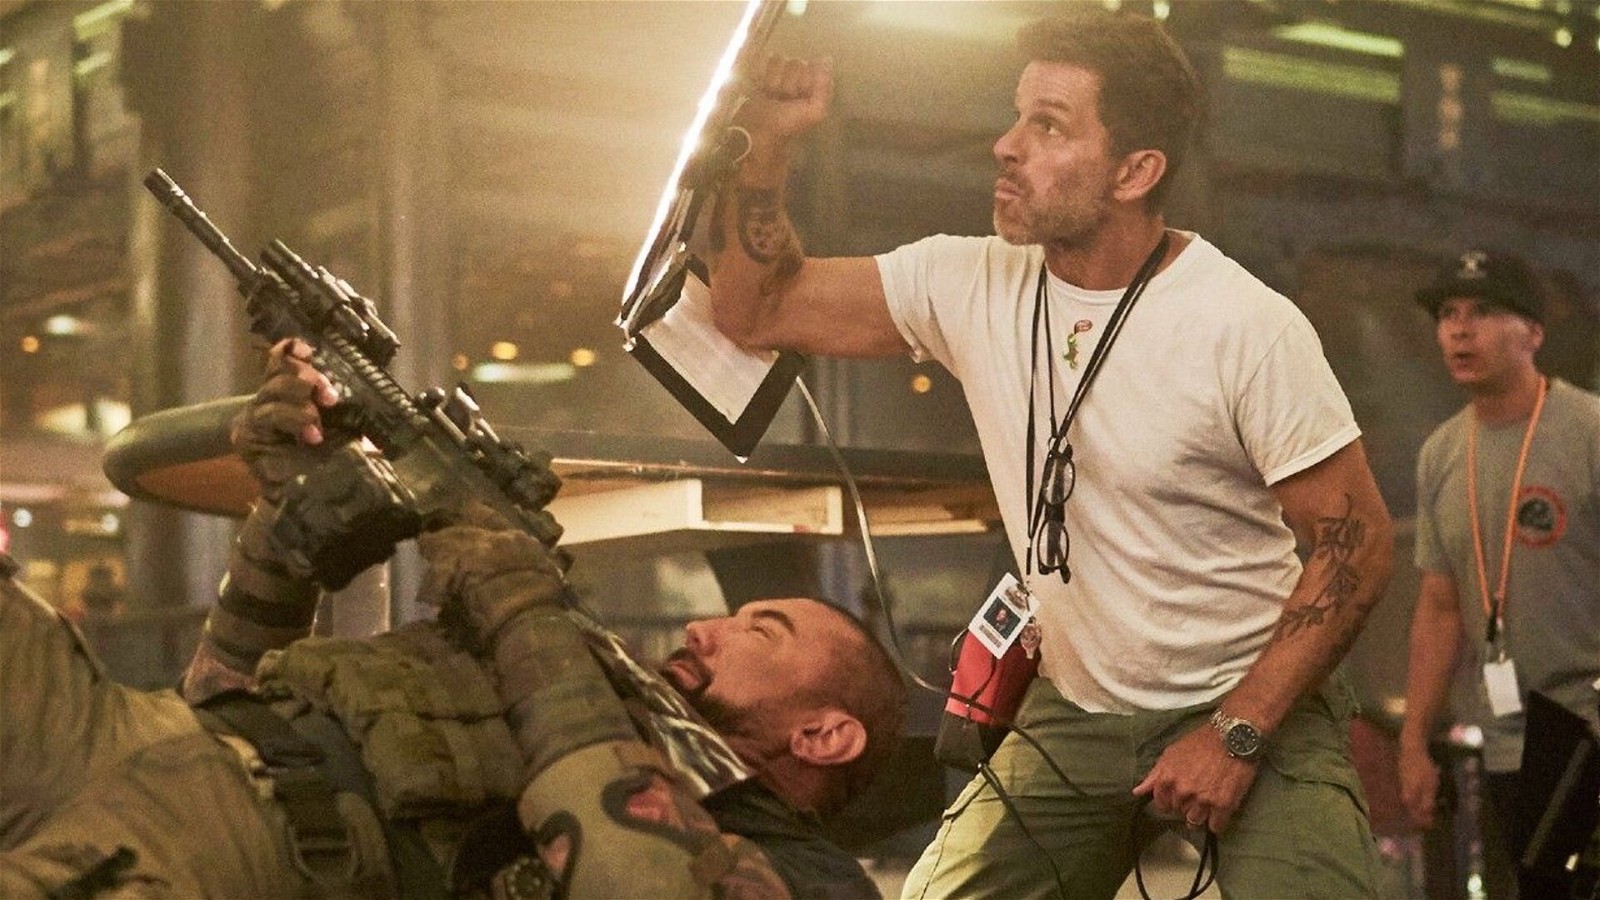 Zack Snyder on the sets of Army of the Dead.